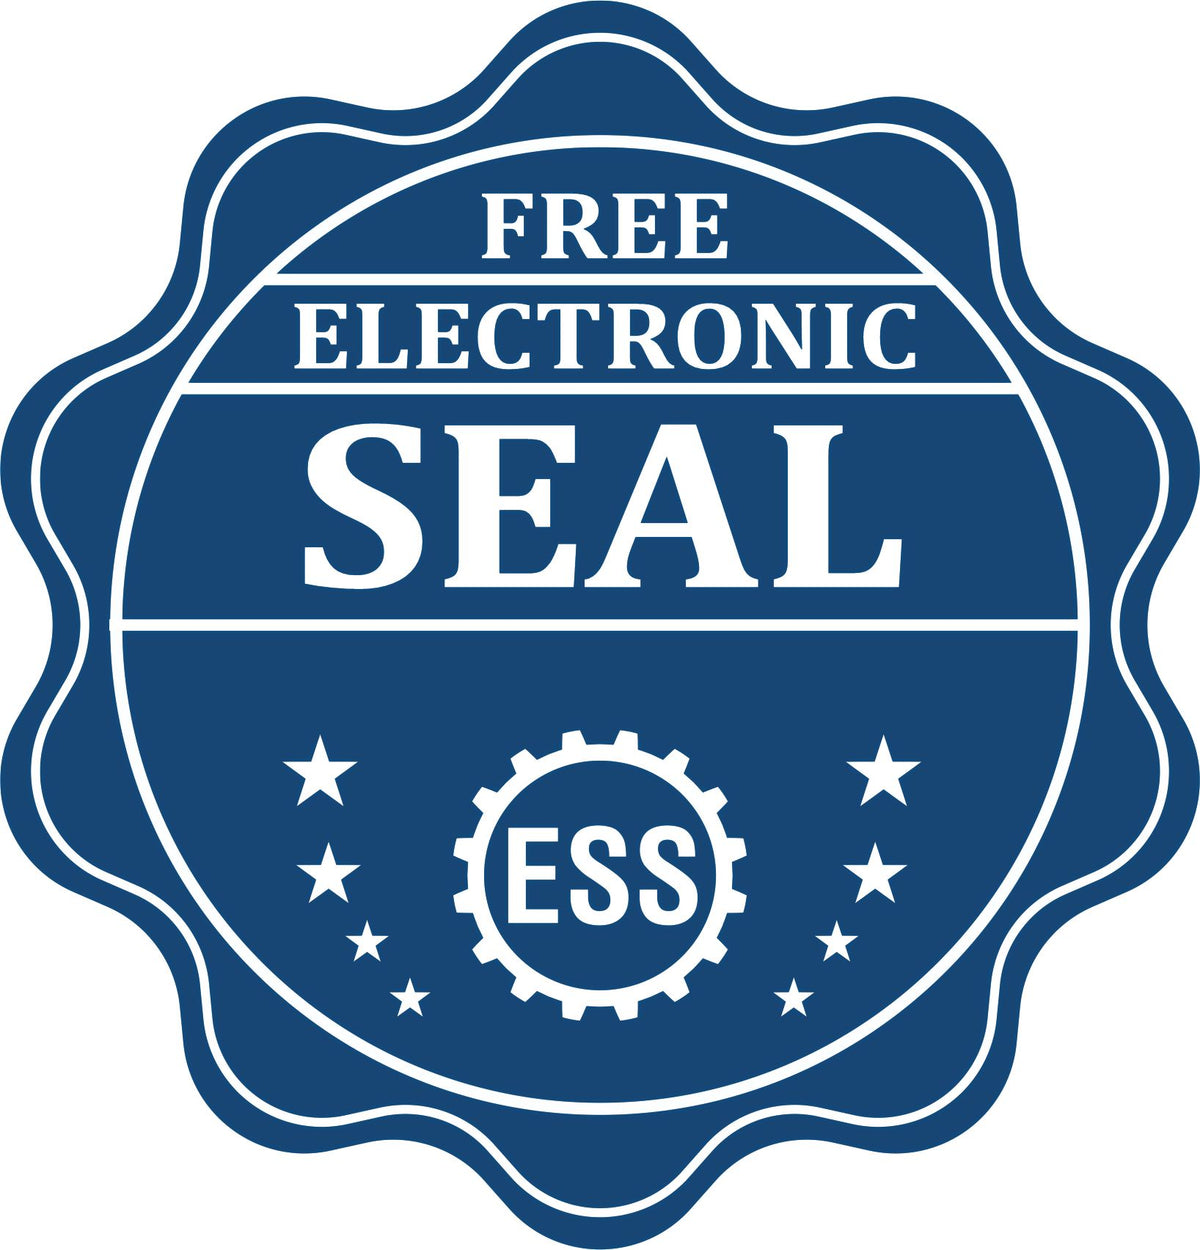 A badge showing a free electronic seal for the Premium MaxLight Pre-Inked Louisiana Geology Stamp with stars and the ESS gear on the emblem.